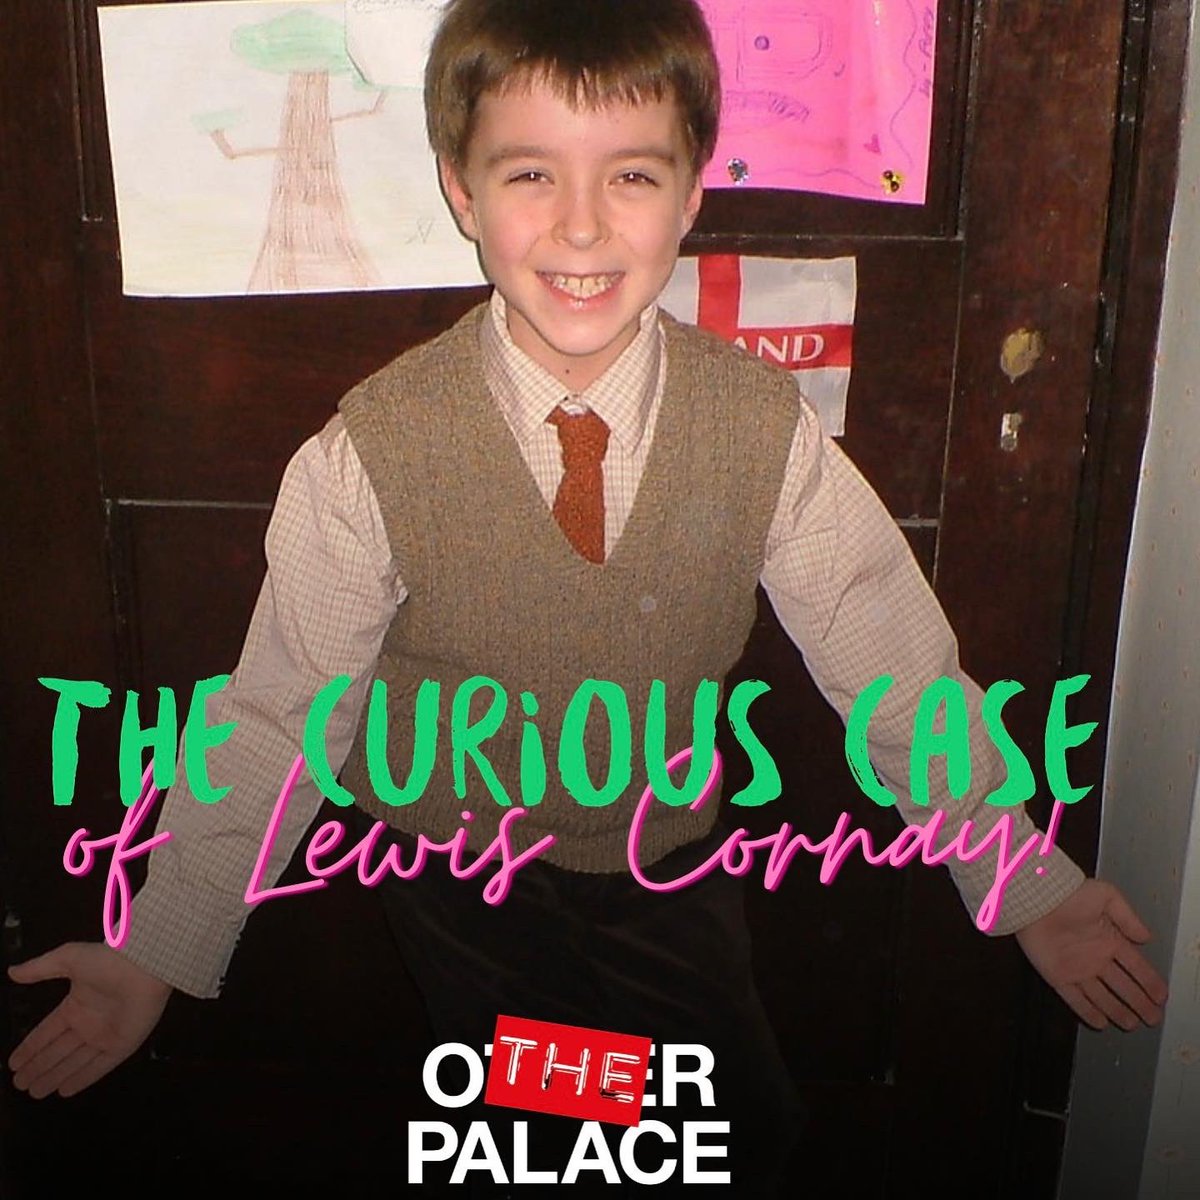 Rob Madge Announced as Final Guest for ‘The Curious Case of Lewis Cornay’ on 29th May at The Other Palace!🌈@Rob_Madge_02 @TheOtherPalace @lewiscornay1